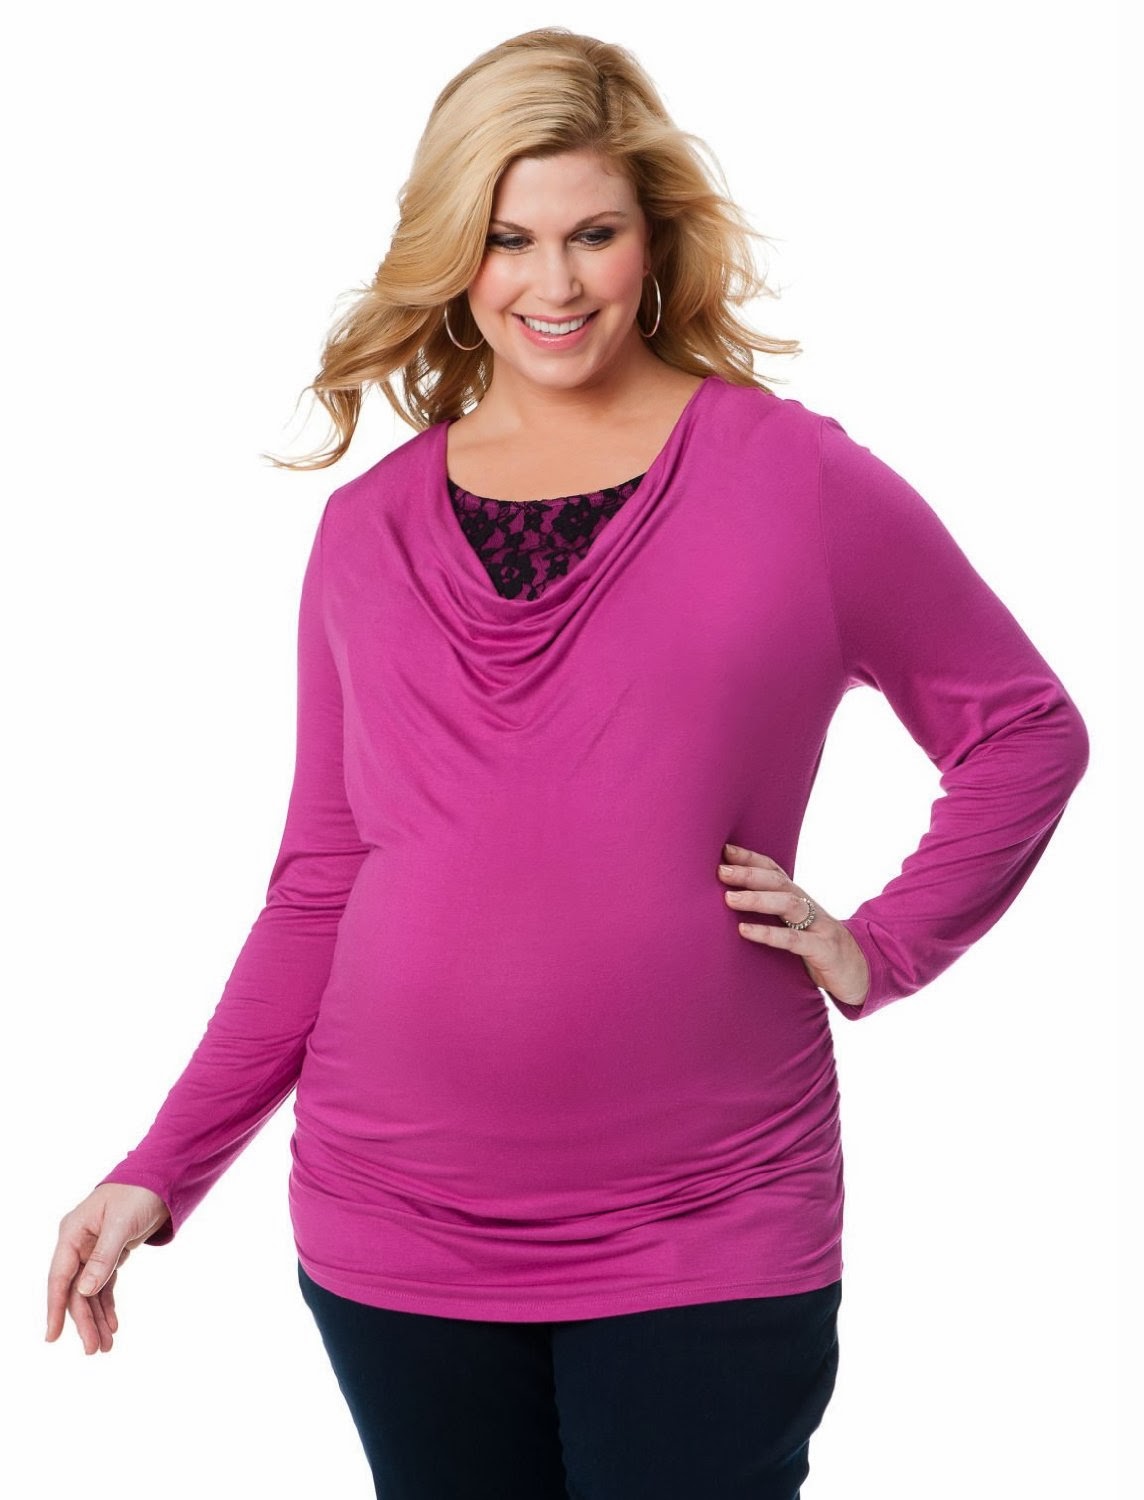 Dress Comfortably in Plus Size Maternity Tops | All About Fashion